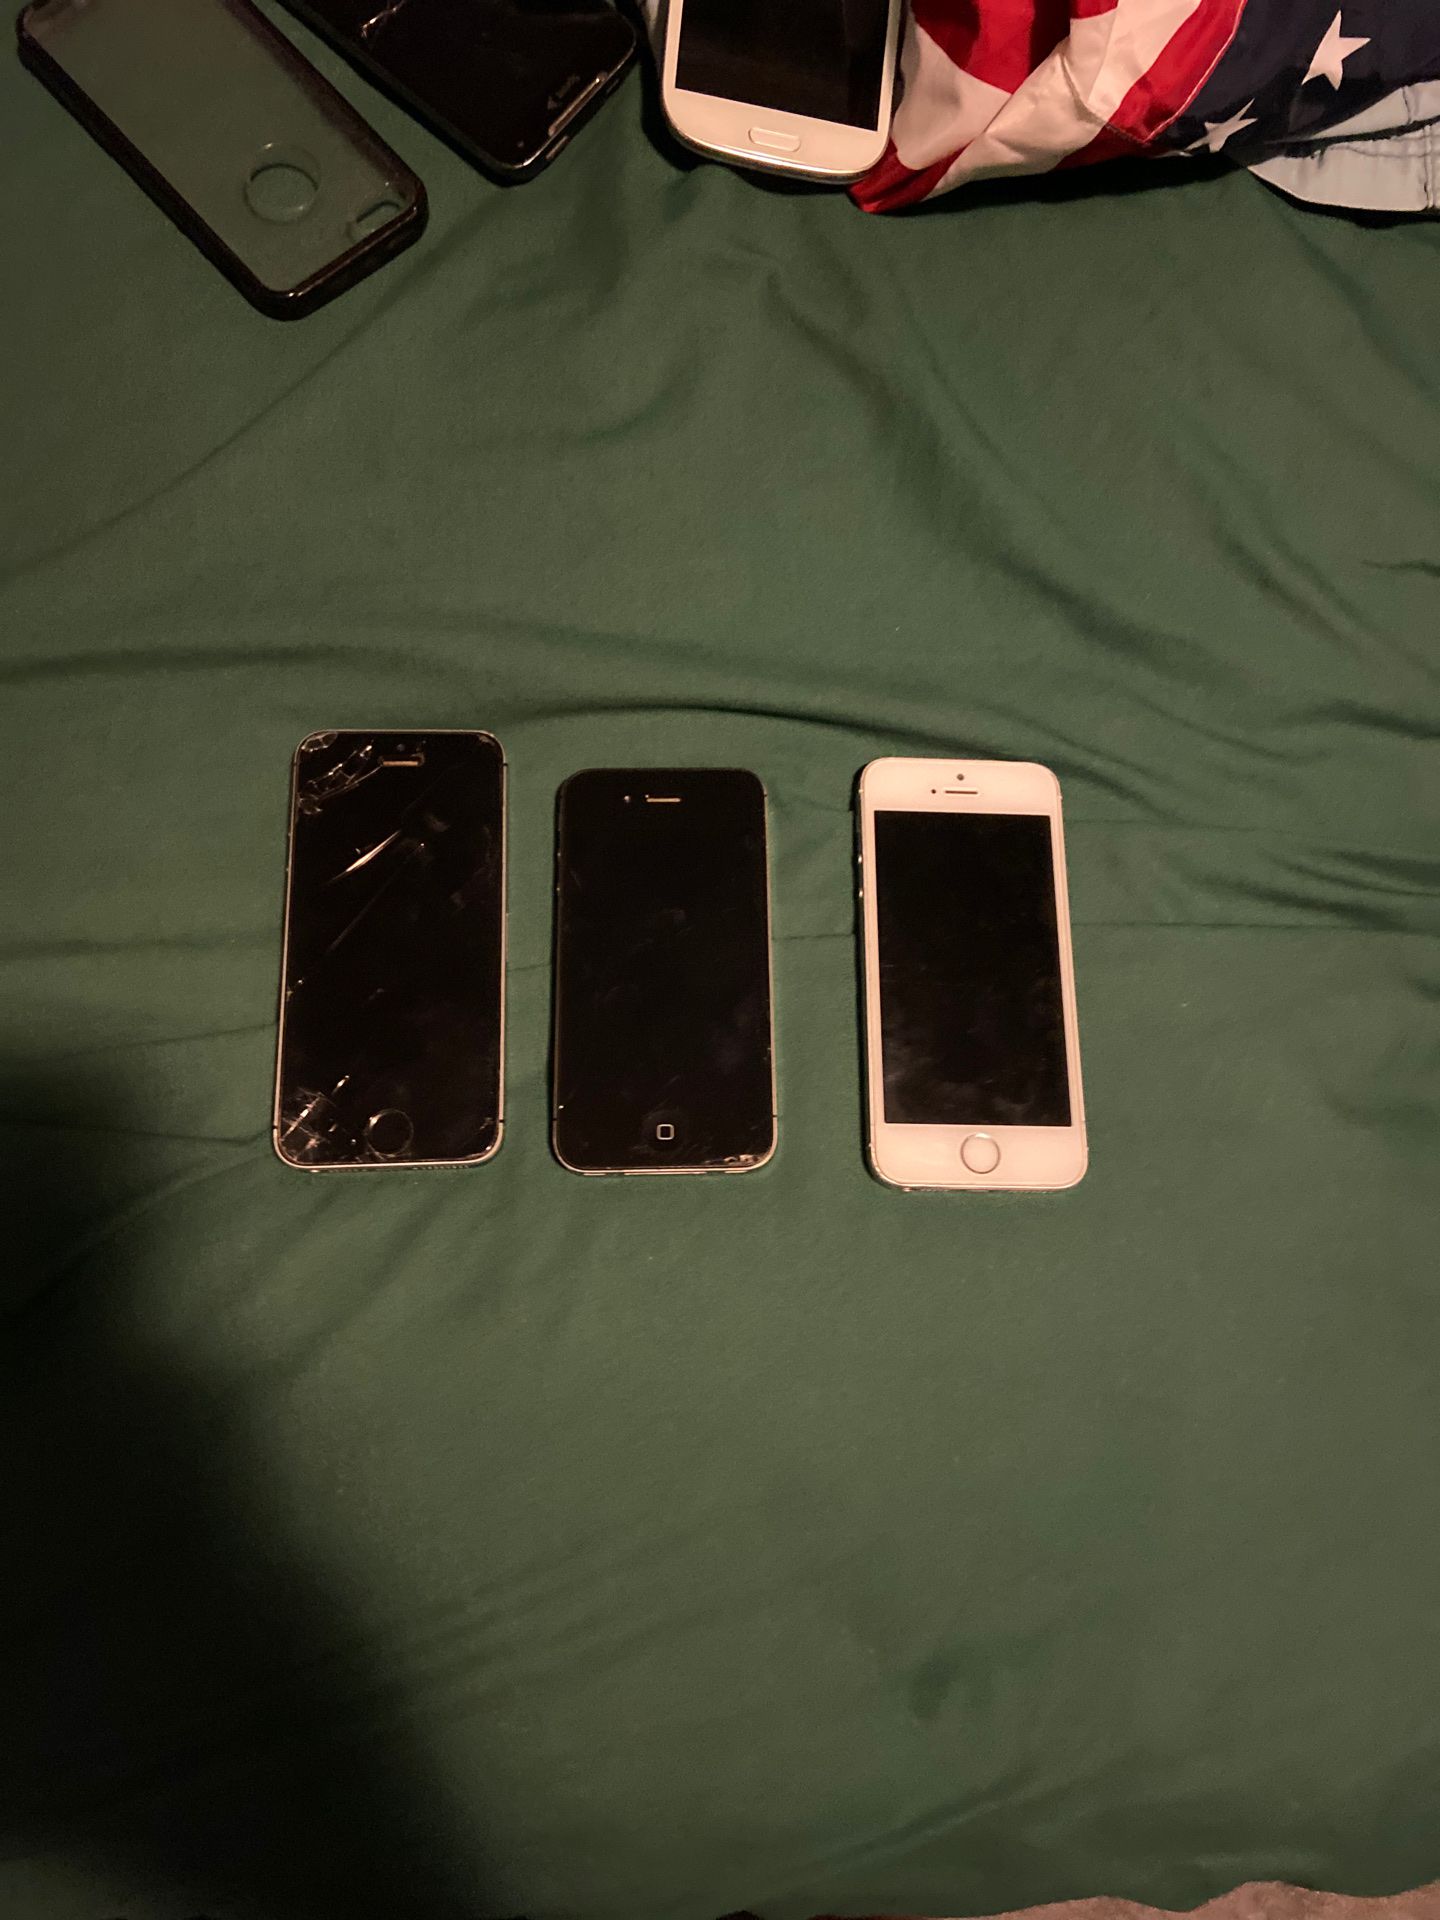 iPhones for parts